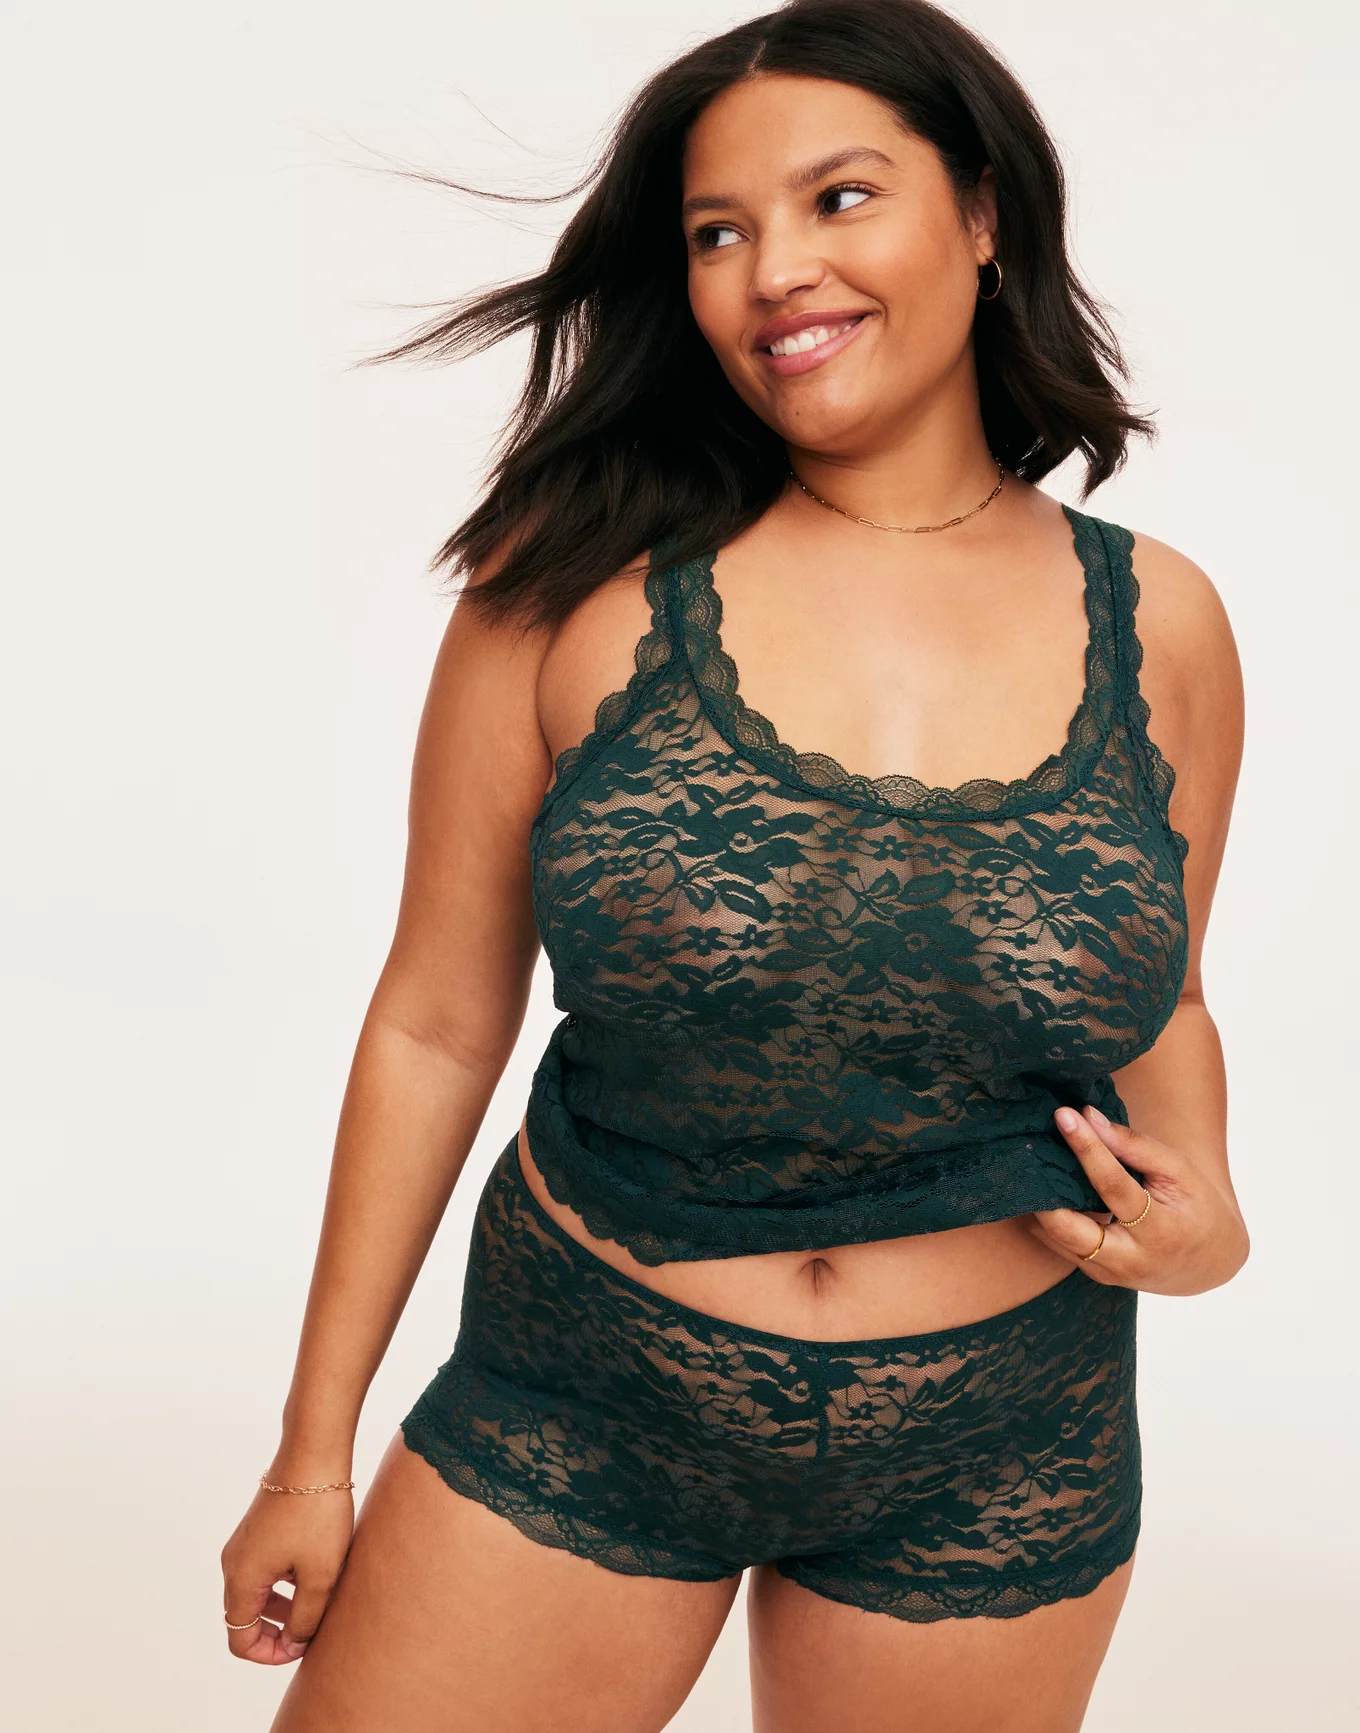 TOP 10 BEST Plus Size Lingerie in New Orleans, Louisiana - March